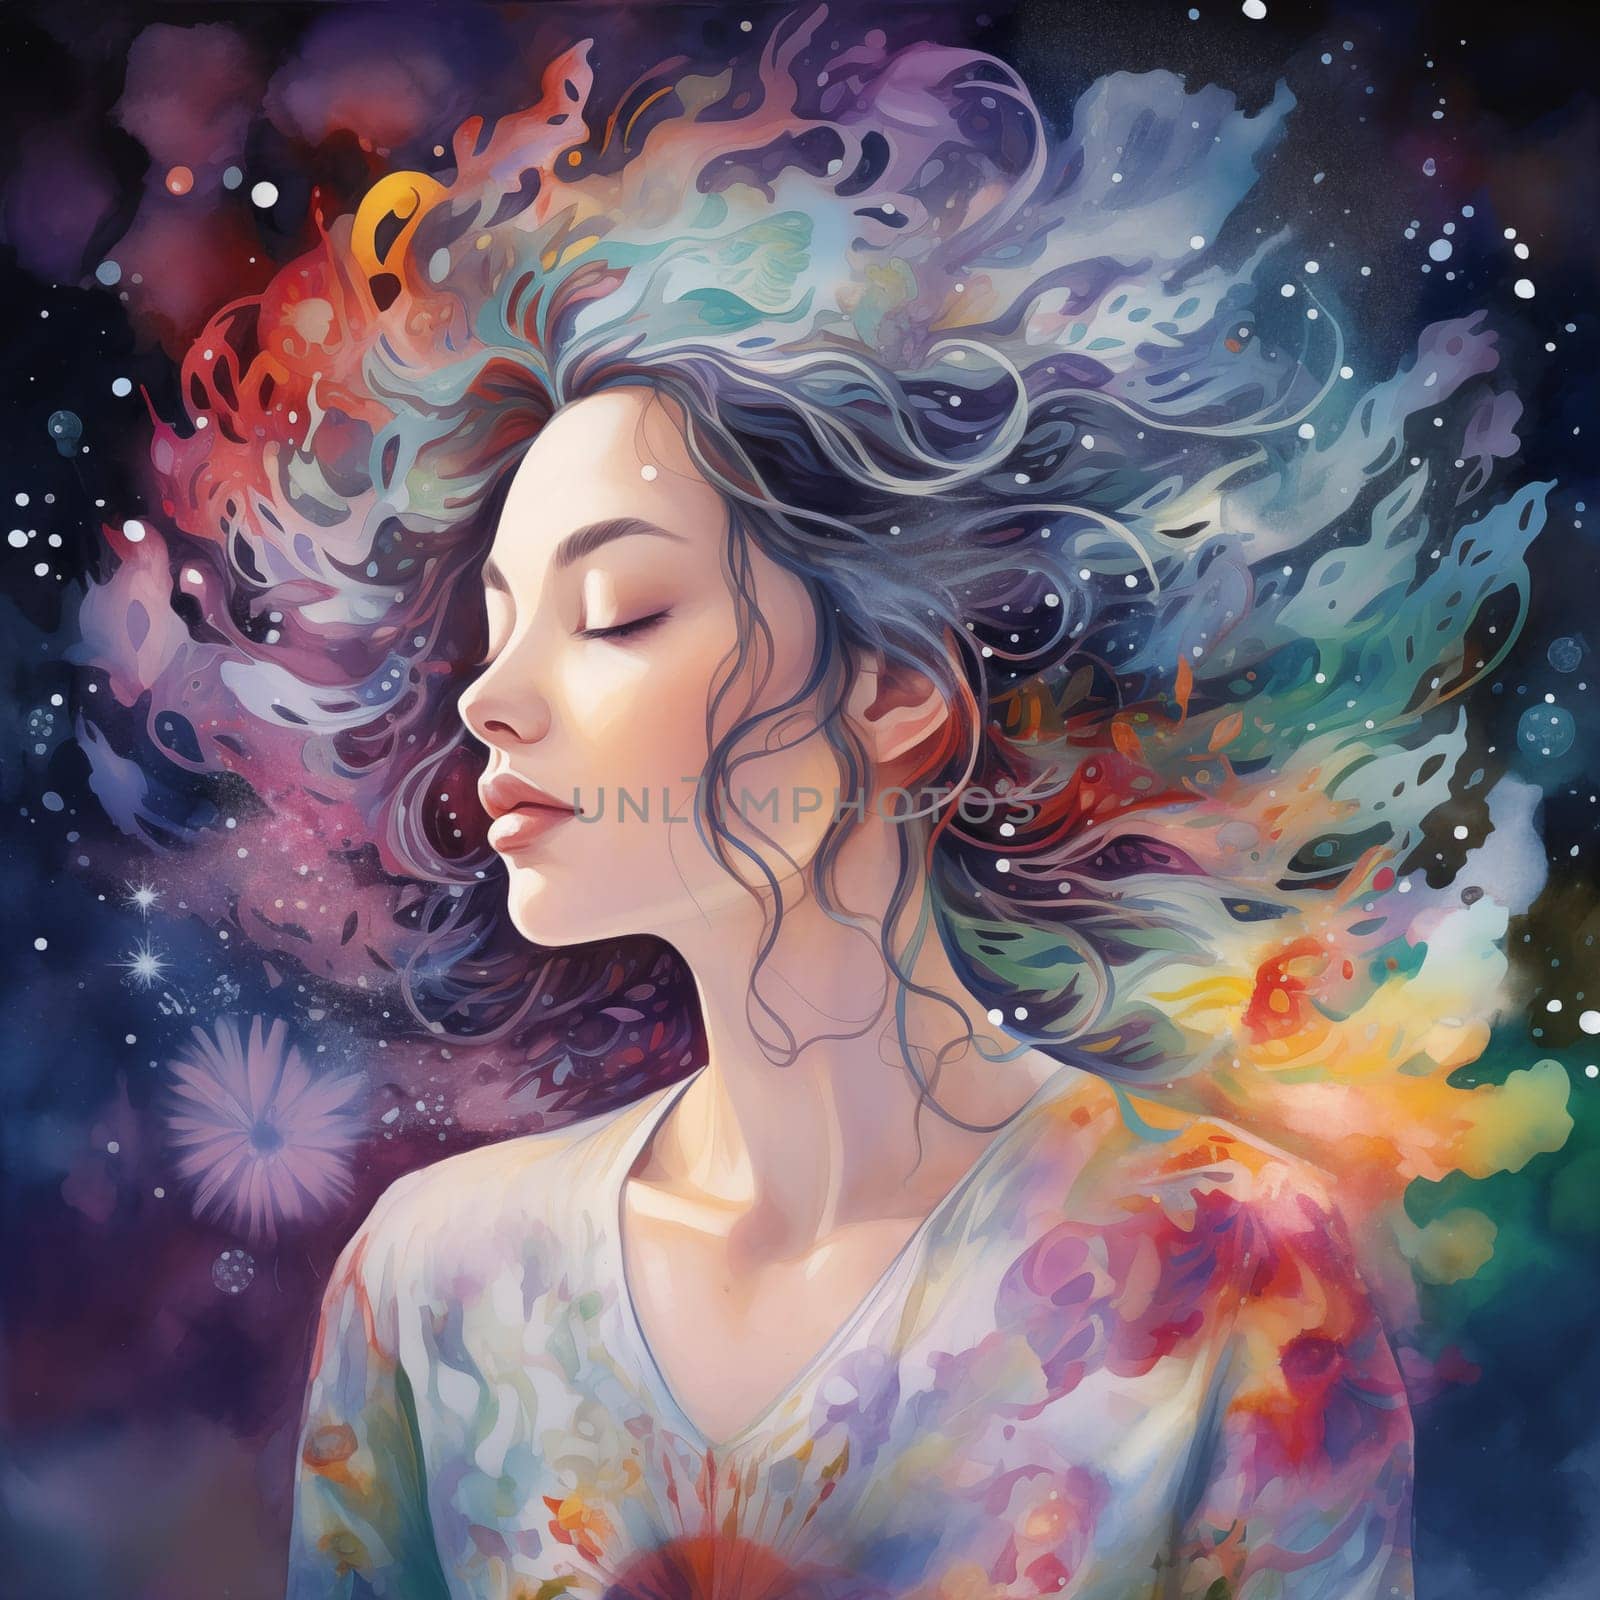 A girl meditating with flowing hair and closed eyes against a cosmic background with nebulae. Close-up. A vibrant illustration capturing the serenity of meditation amidst the wonders of the universe. by veronawinner